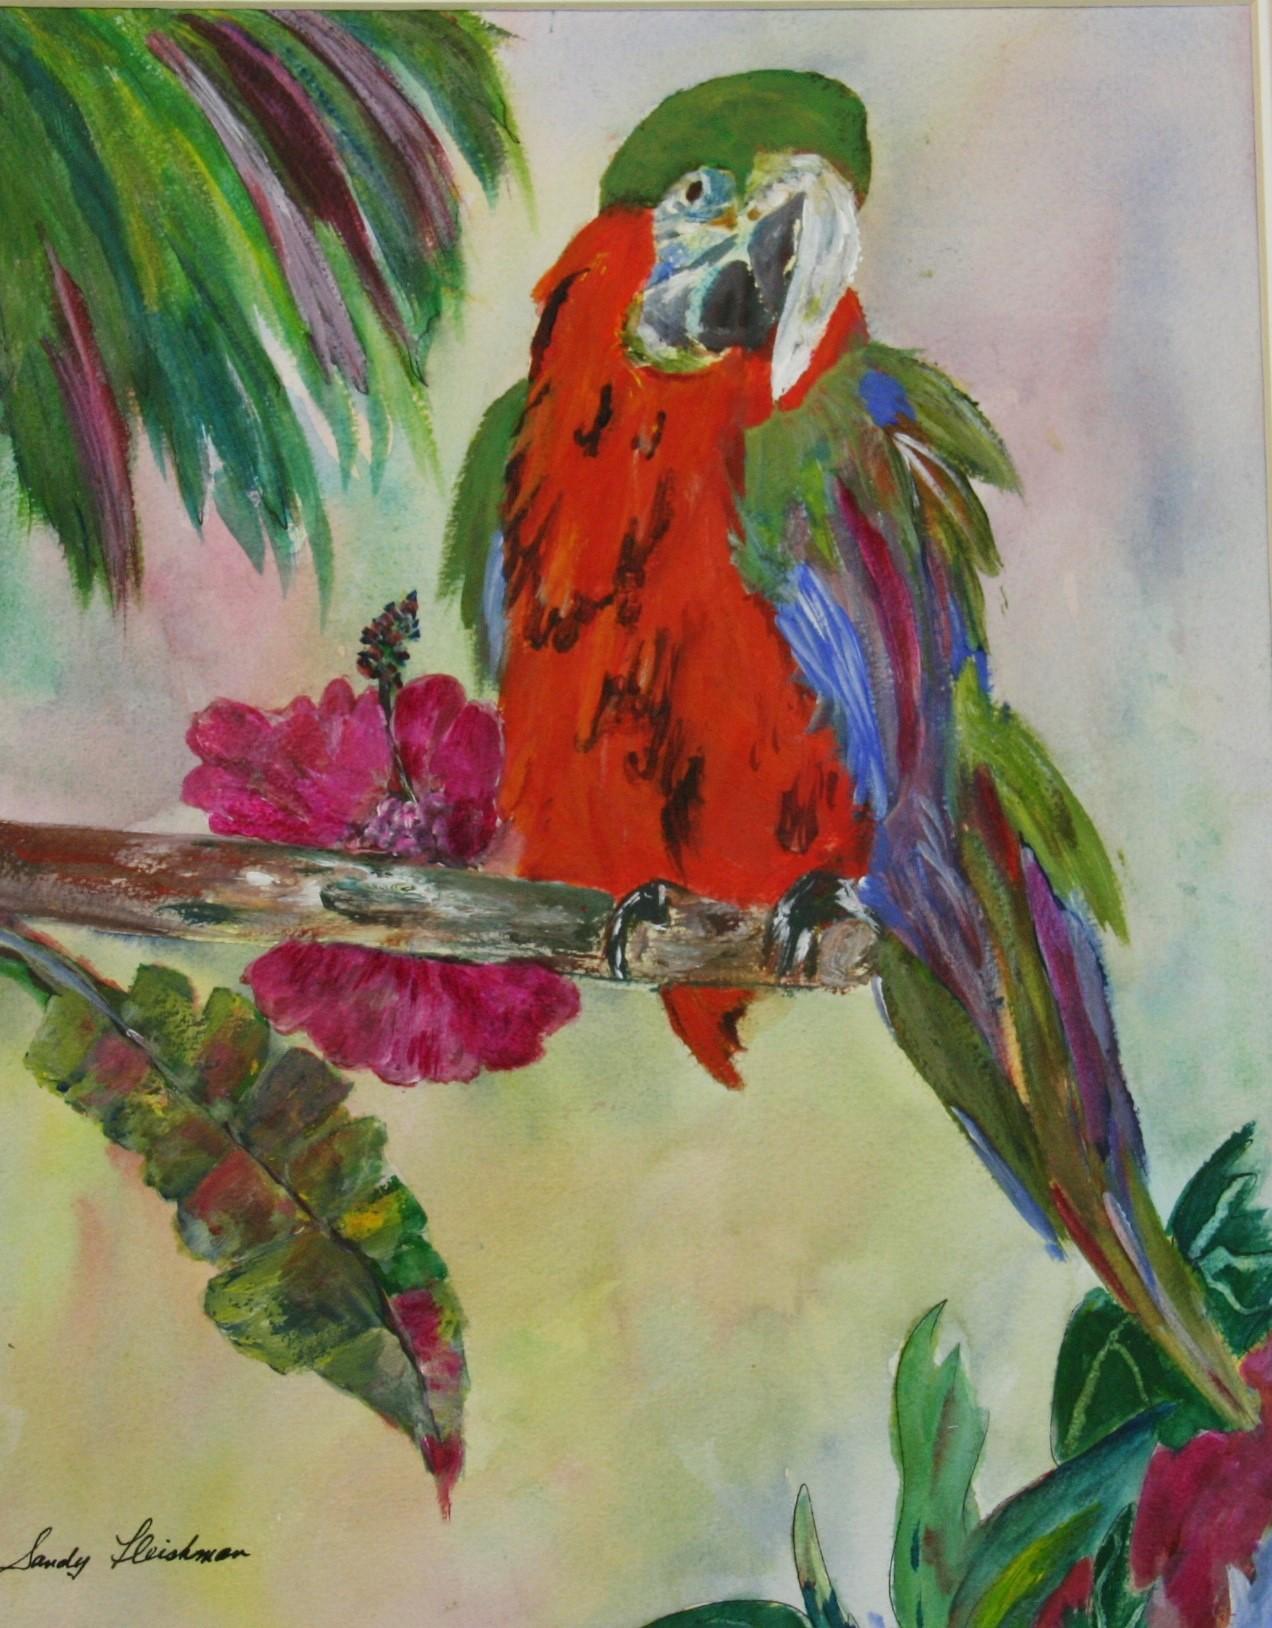 3862 Colorful parrot painting on artist paper set in a mat
Image size 13.5x10.5